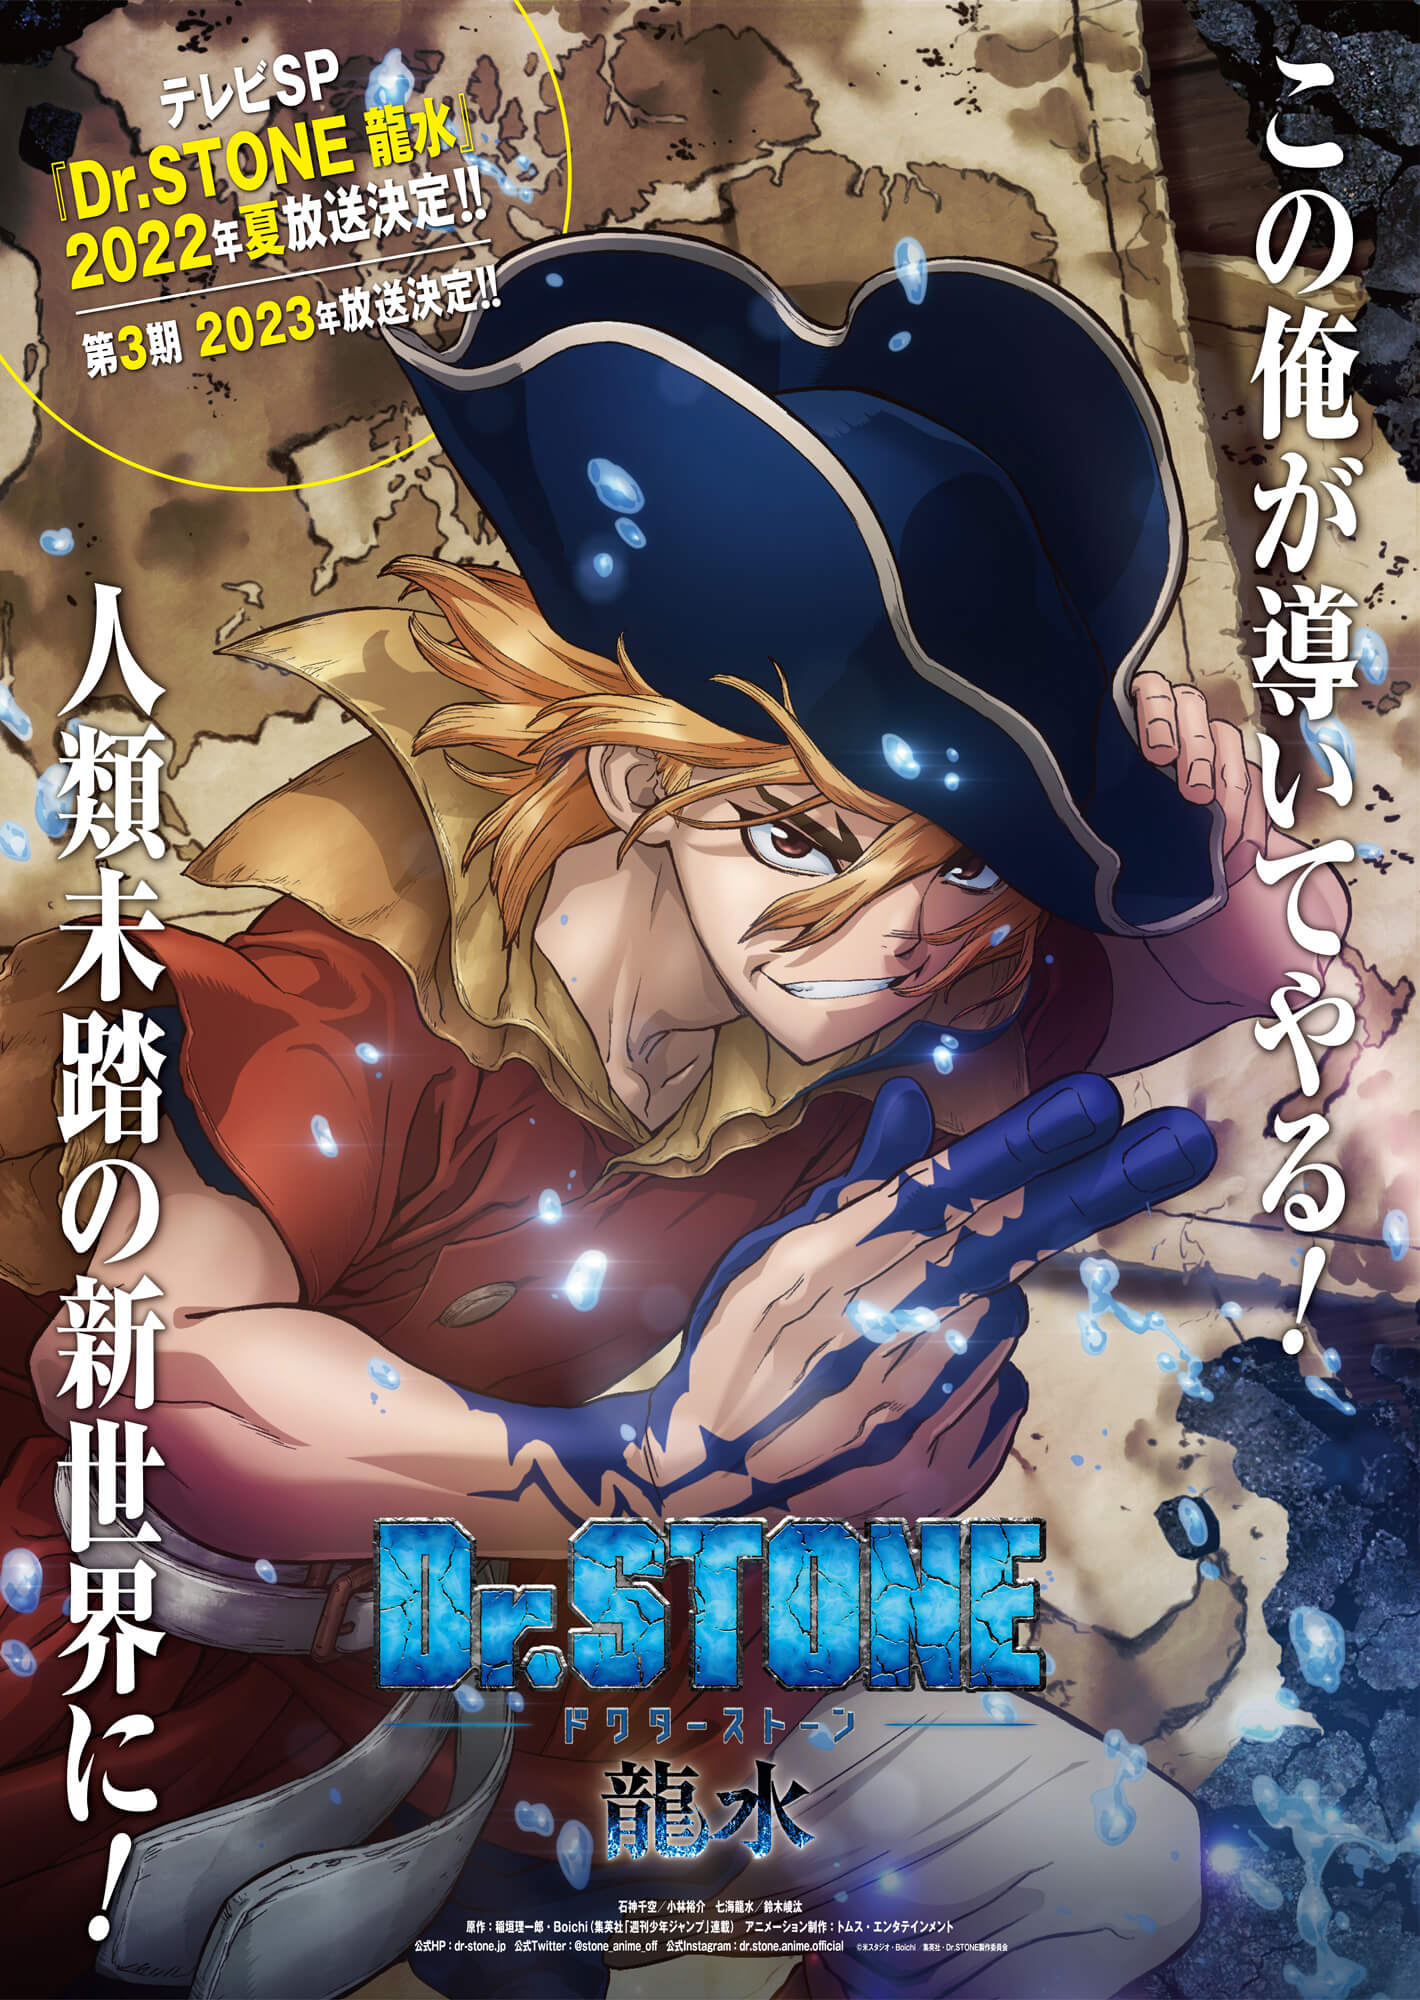 Dr. Stone: New World Part 2 Reveals Theme Song Artist and Release